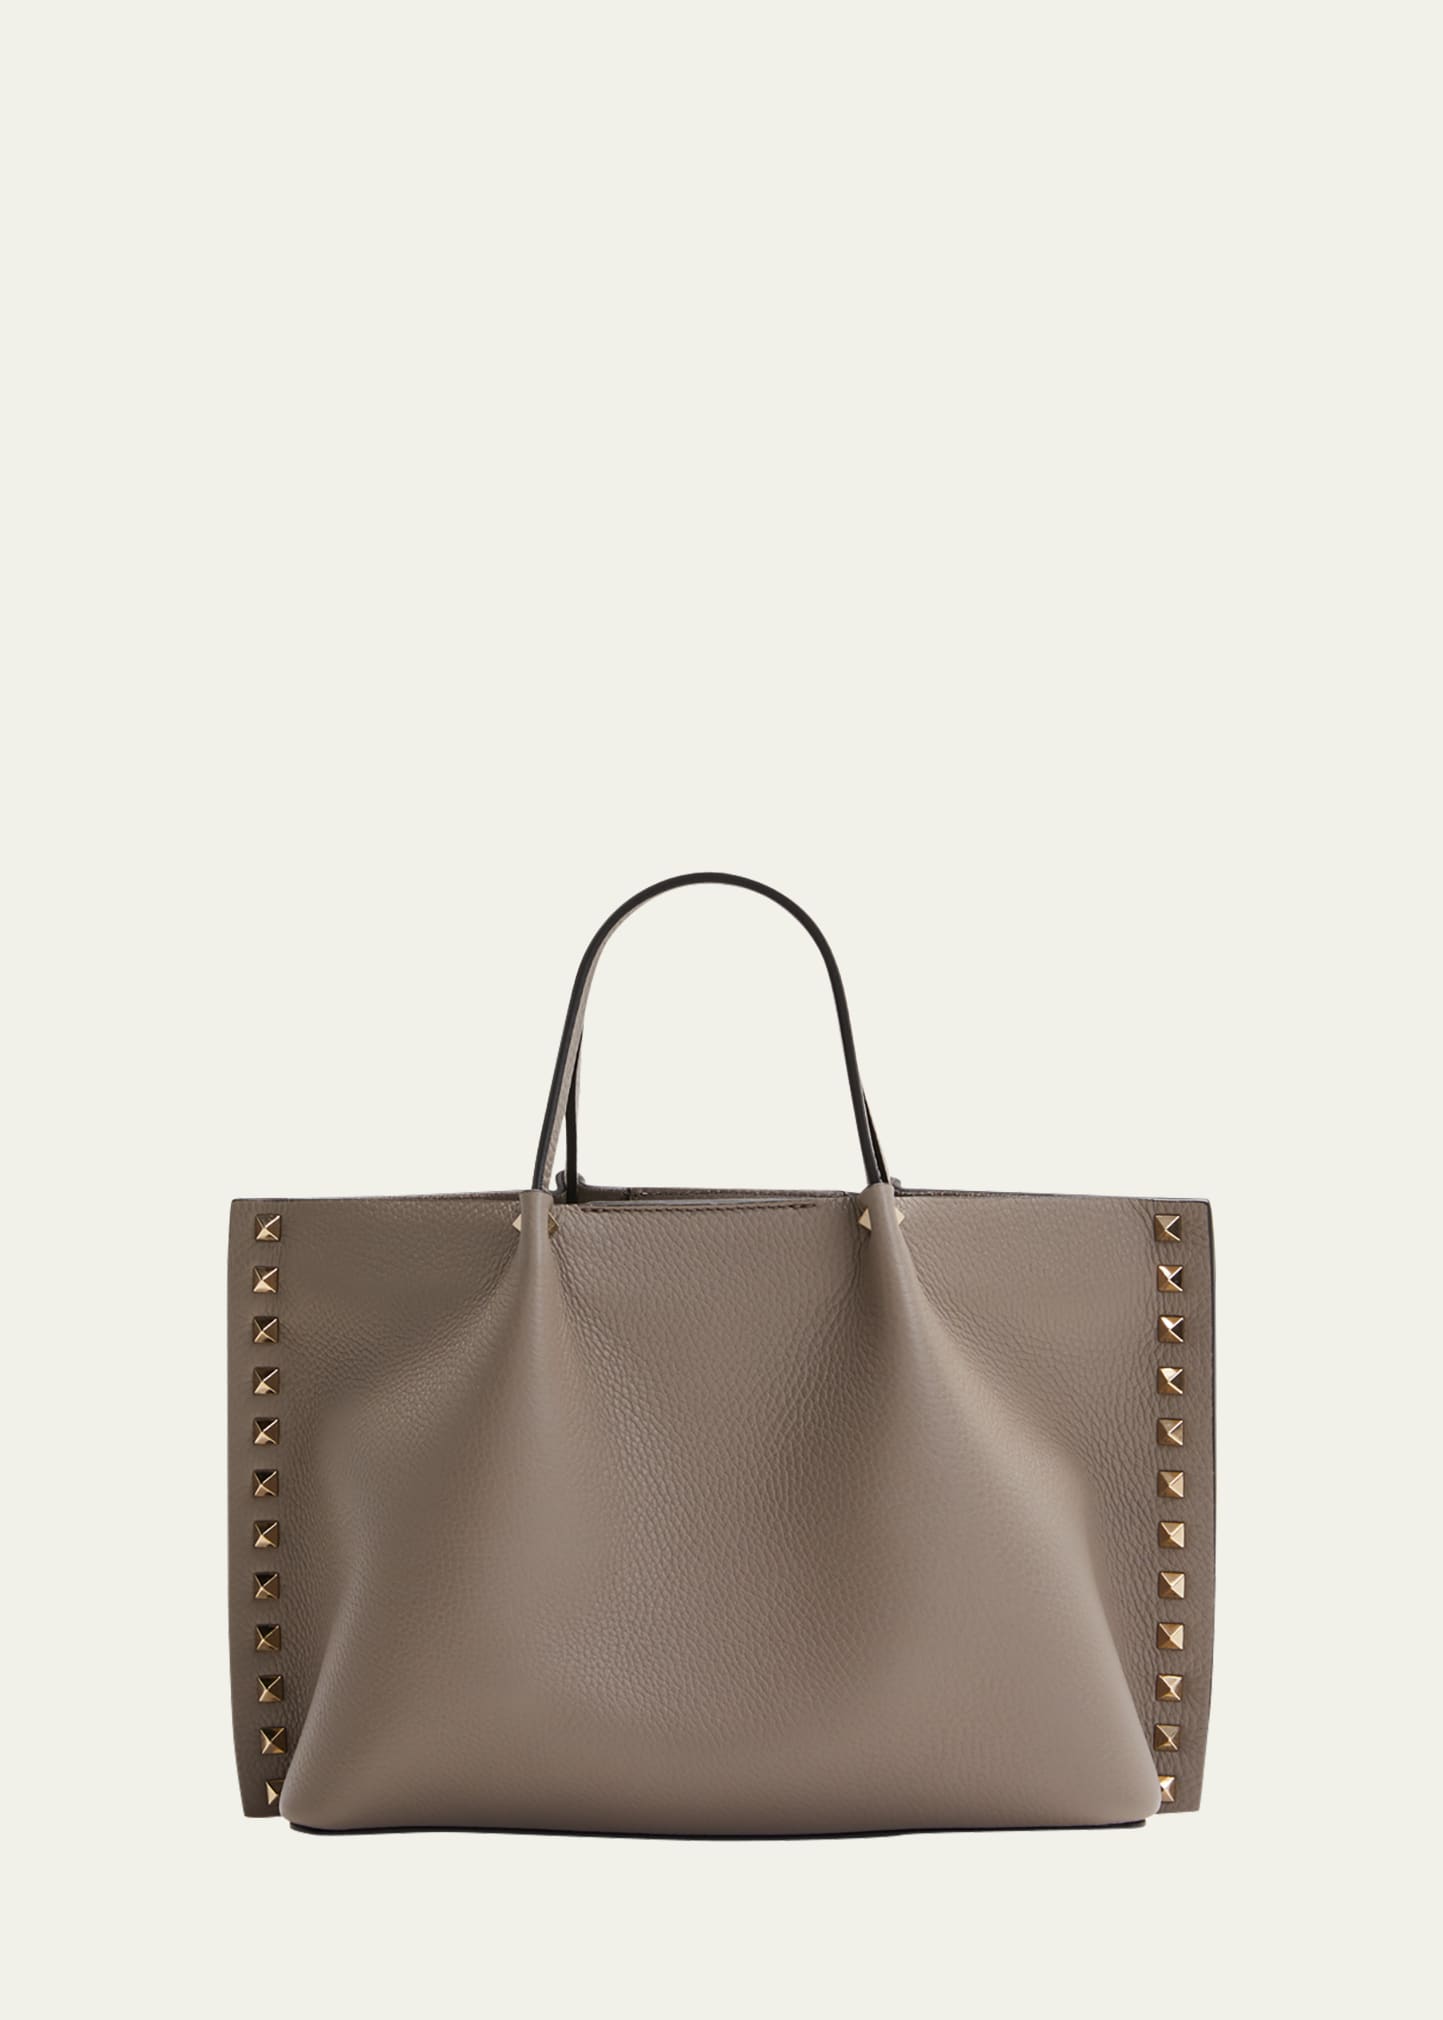 Valentino Garavani Rockstud Small East-west Leather Tote Bag In Nb9 Moon Taupe